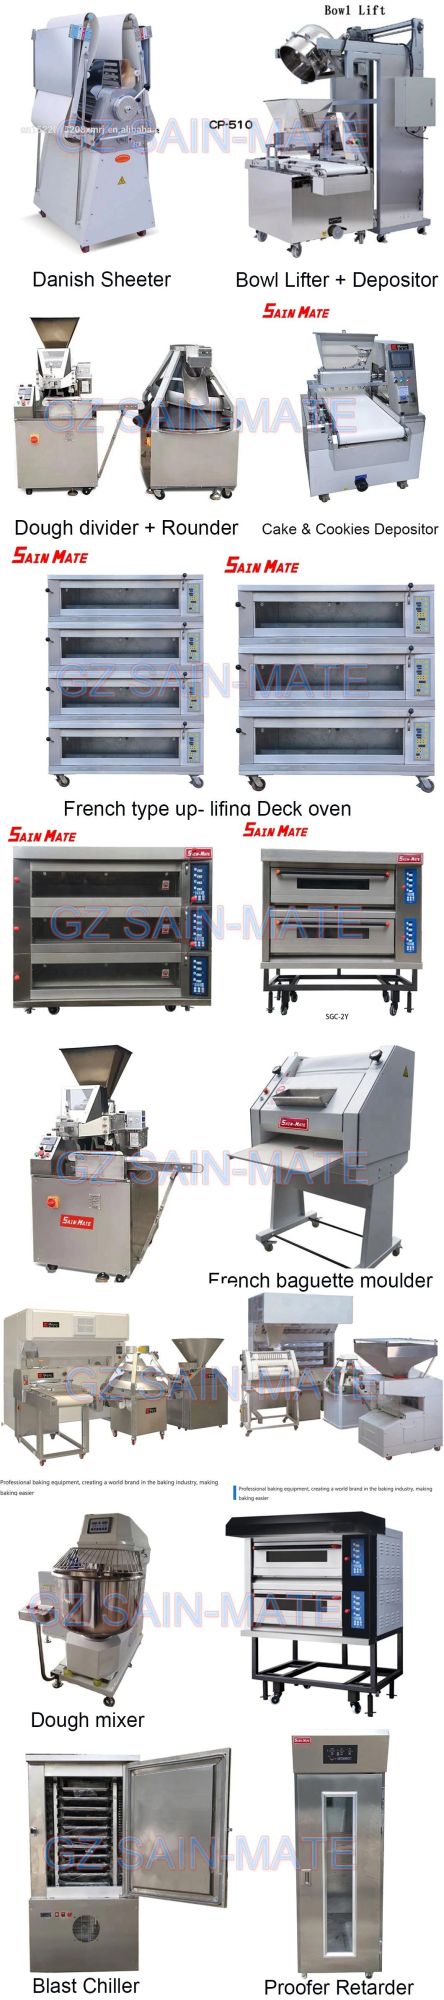 High Quality Italy Burners for Rotary Oven, 32 Trays Rotary Oven Burner